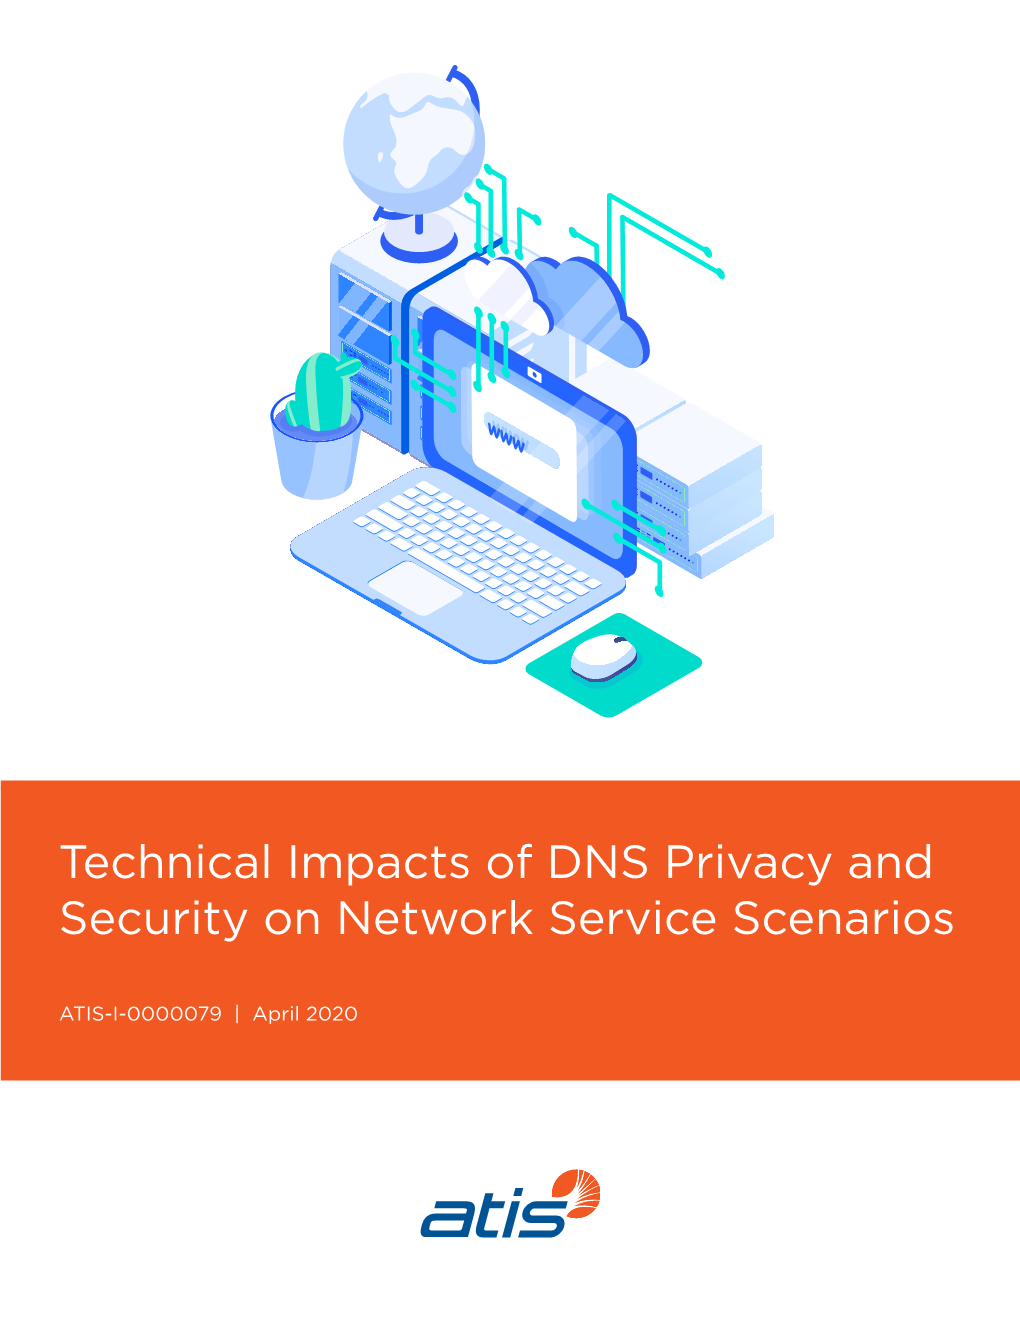 Technical Impacts of DNS Privacy and Security on Network Service Scenarios